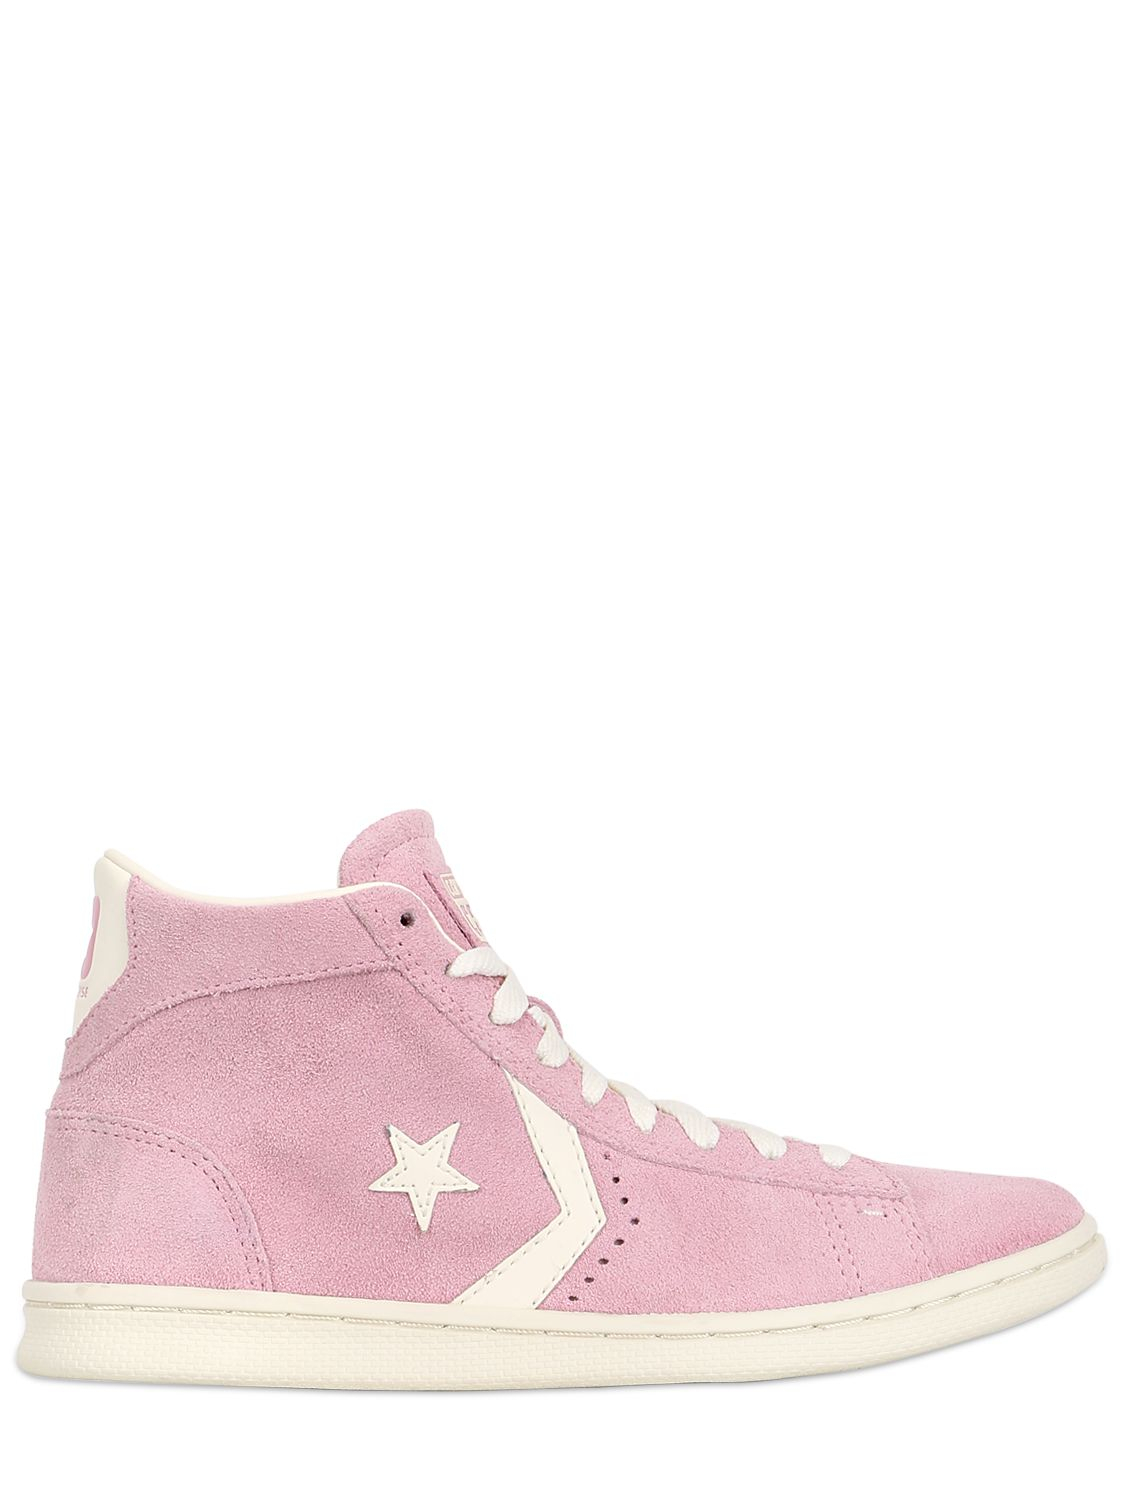 Converse Pro Leather Lp Suede High Top Sneakers in Pink for Men - Lyst